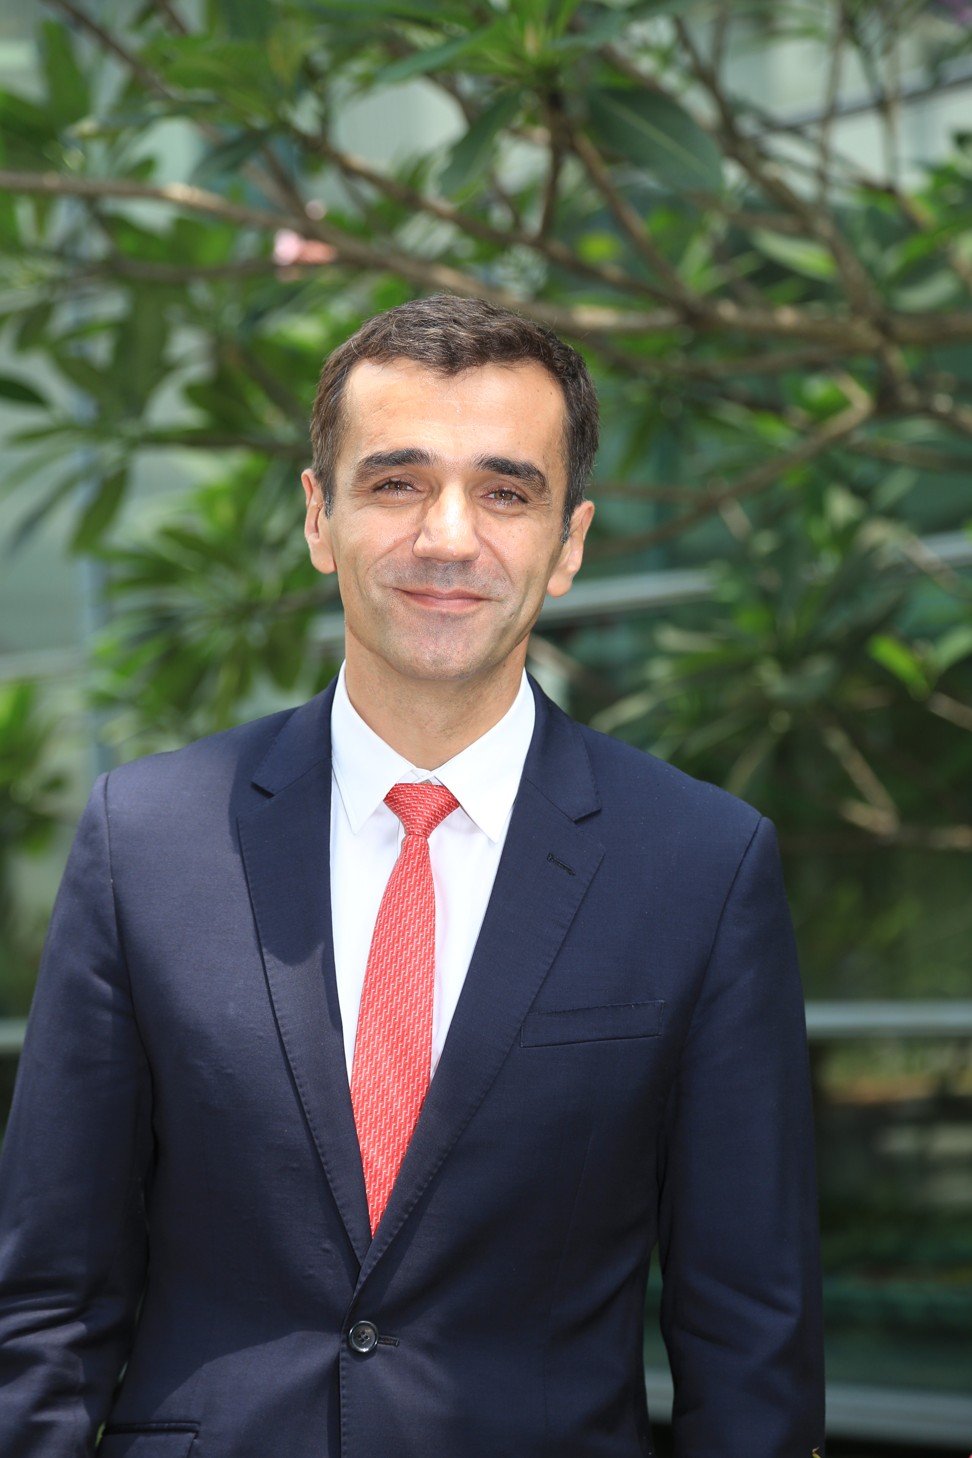 Ilian Mihov, dean of INSEAD, says though the number of female entrepreneurs has increased in the last years, they are still significantly lower than the number of male entrepreneurs.